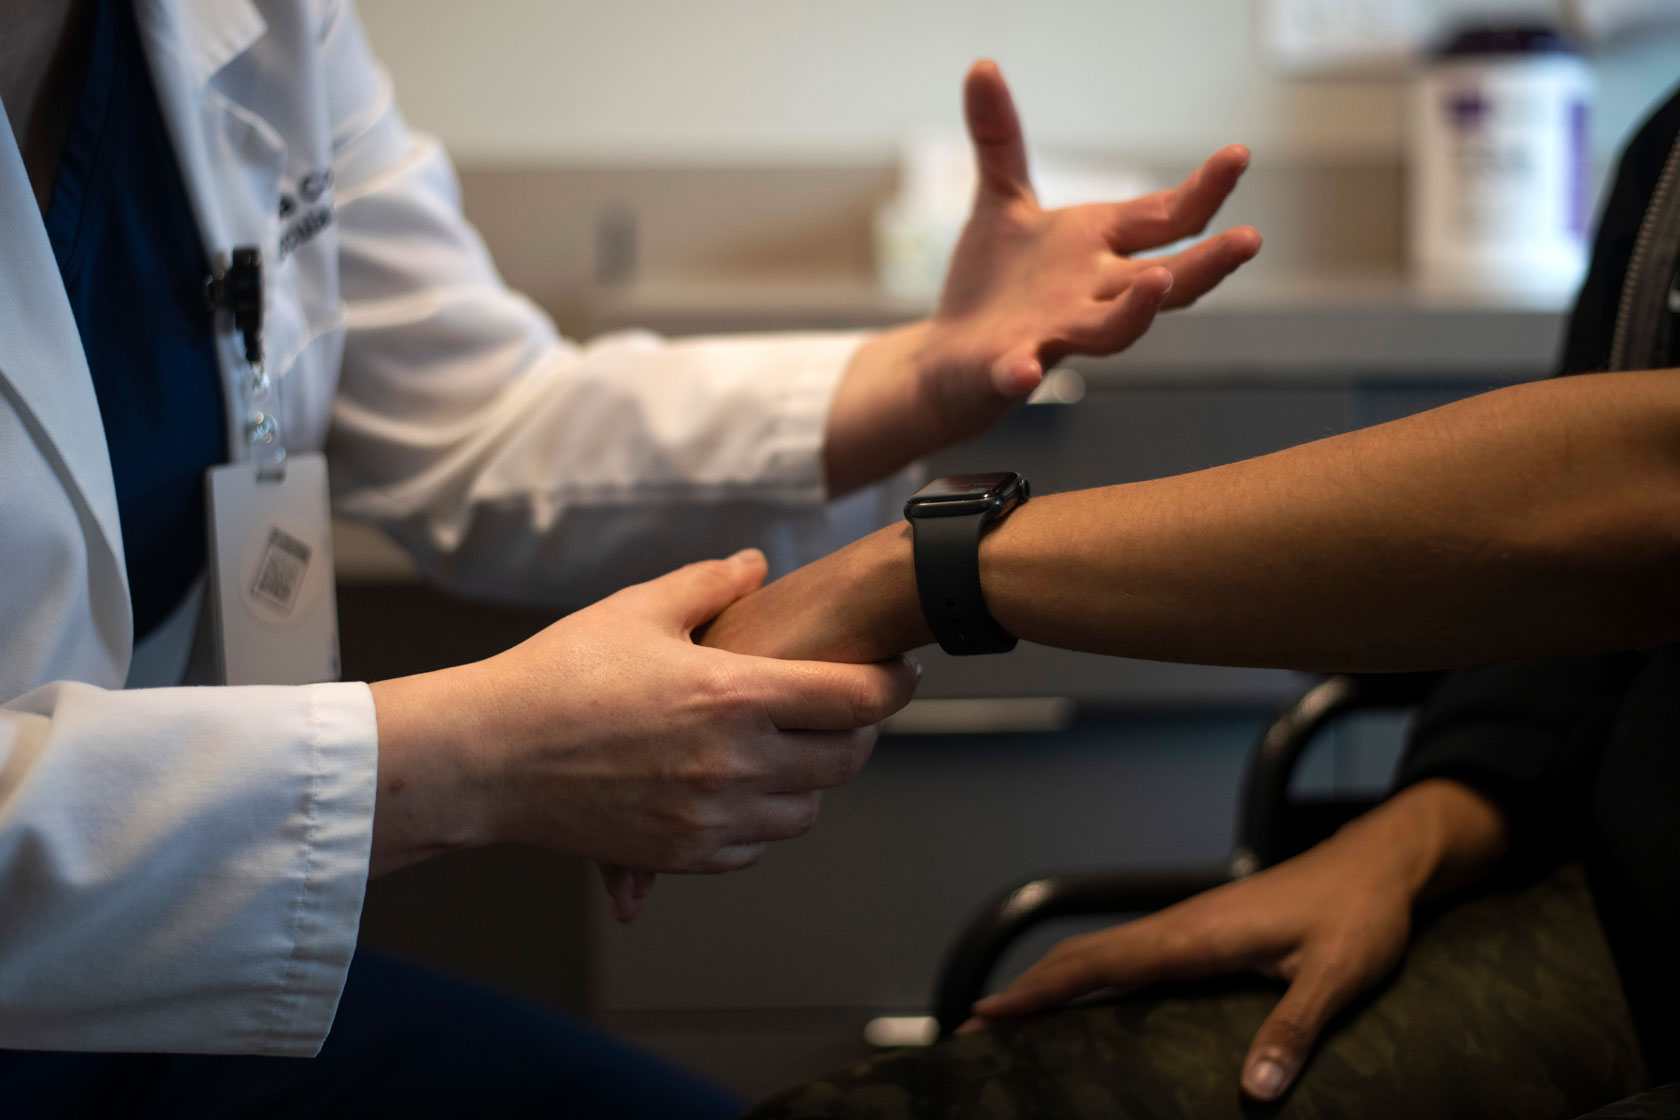 A doctor holds a patients hand during an appointment.